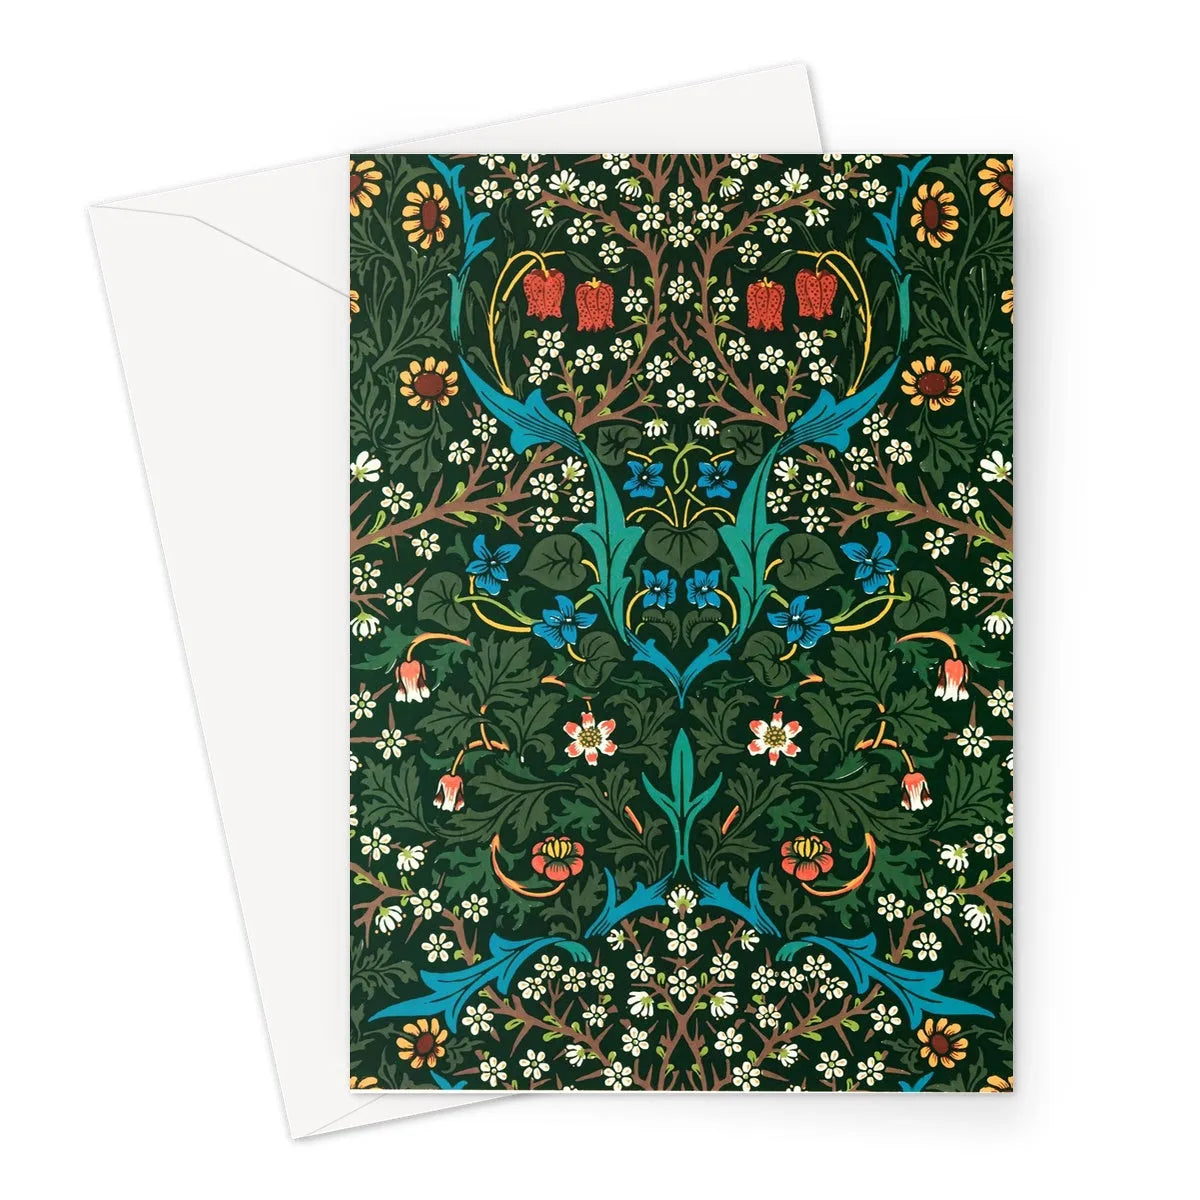 Tulips By William Morris Greeting Card - A5 Portrait / 10 Cards - Greeting & Note Cards - Aesthetic Art